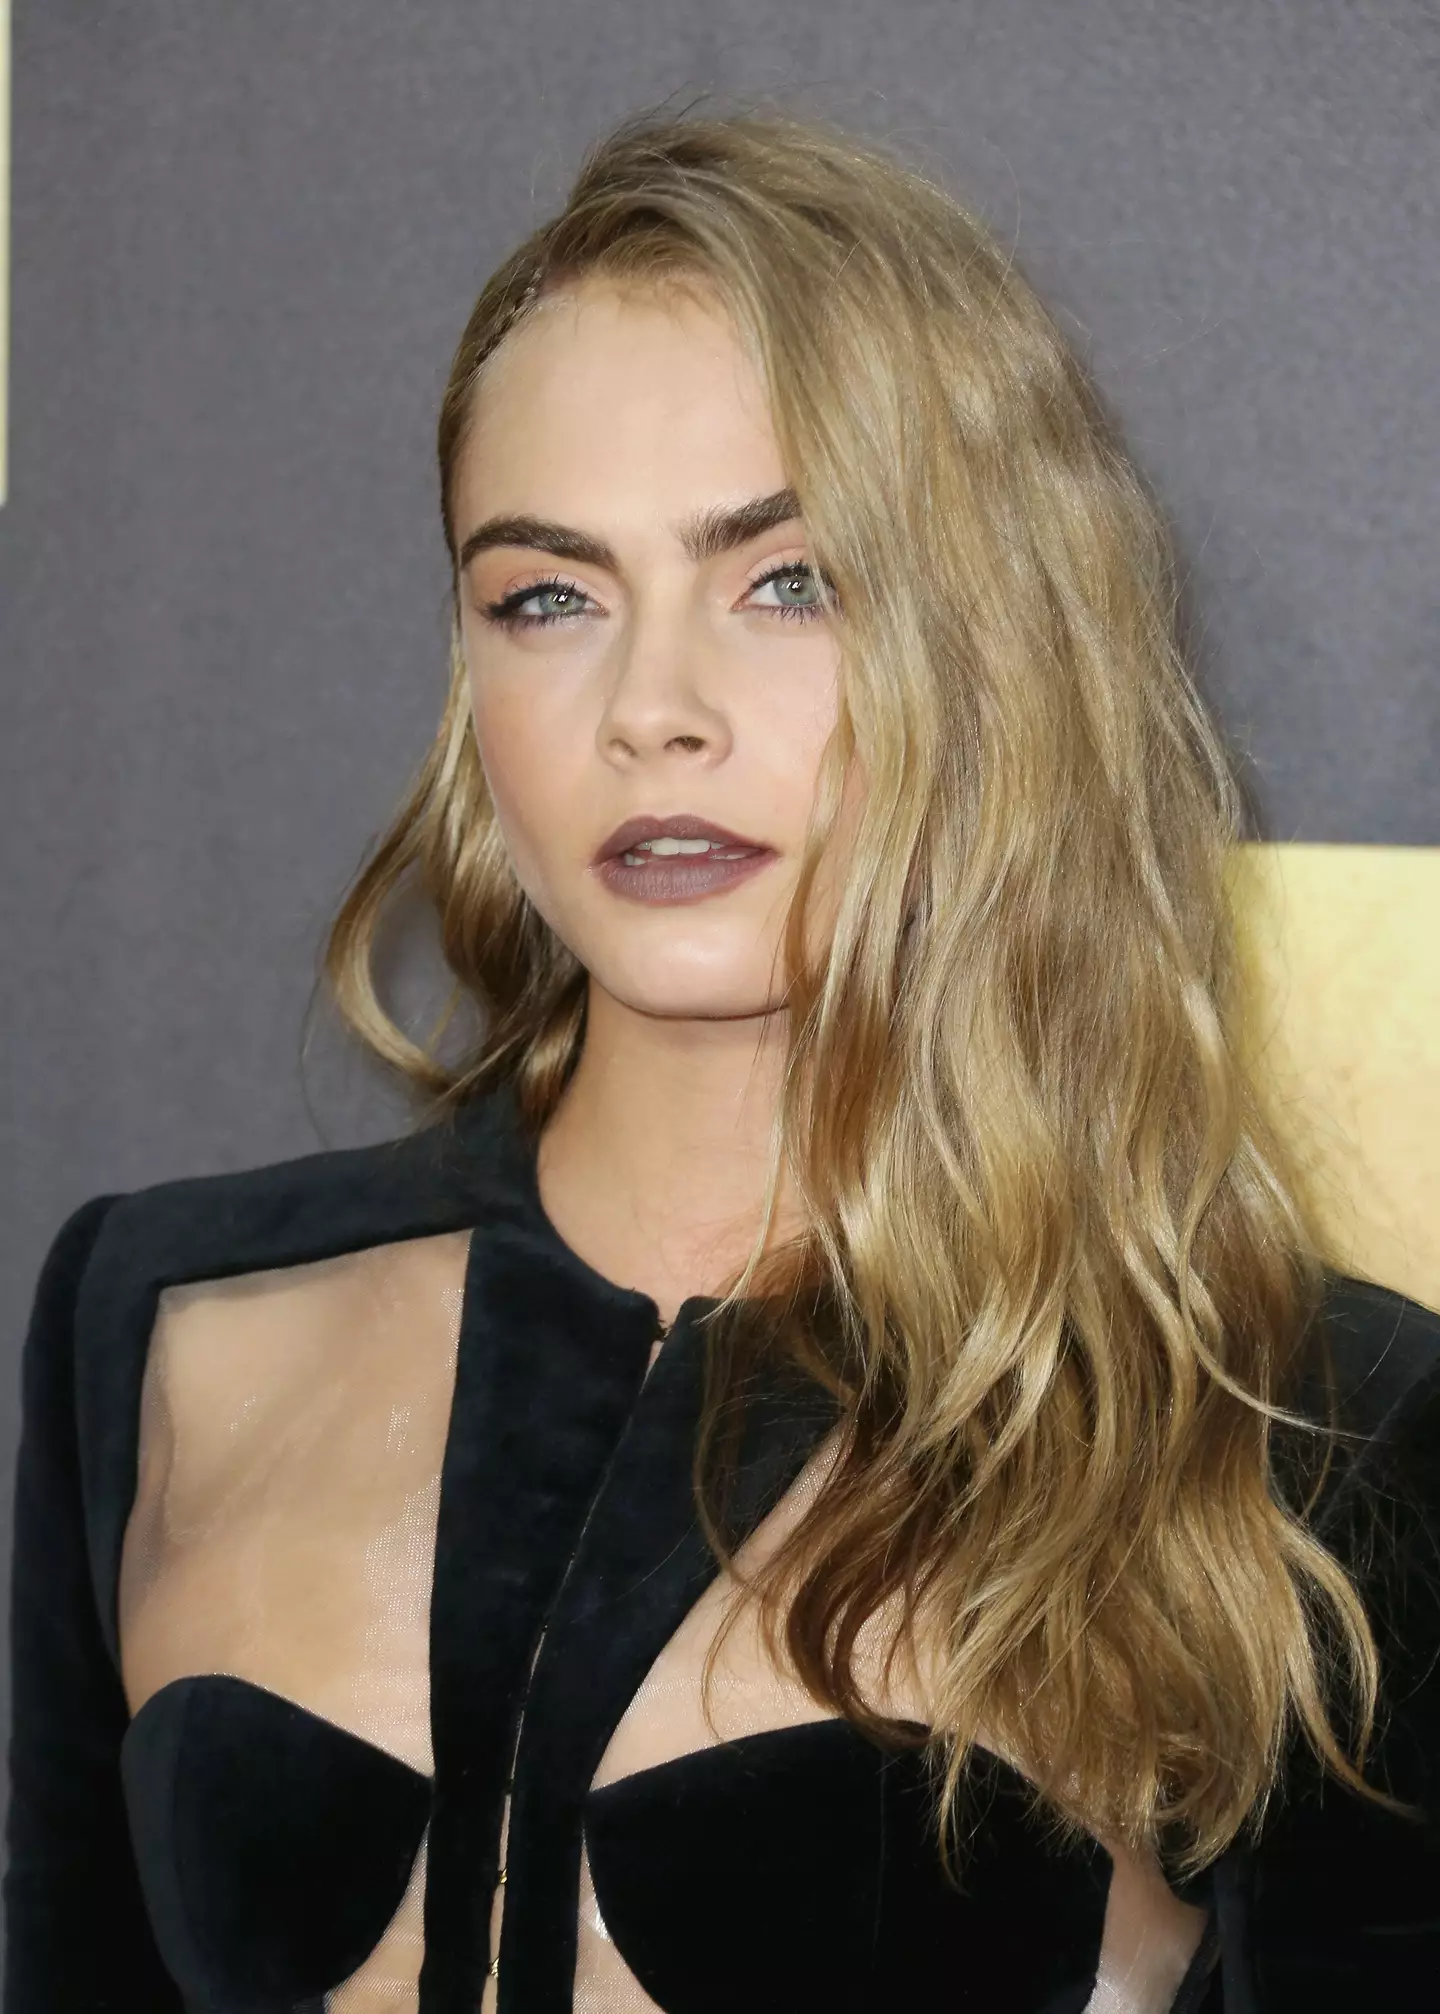 Supermodel Cara Delevingne has spoken about her mother and her addiction struggles.